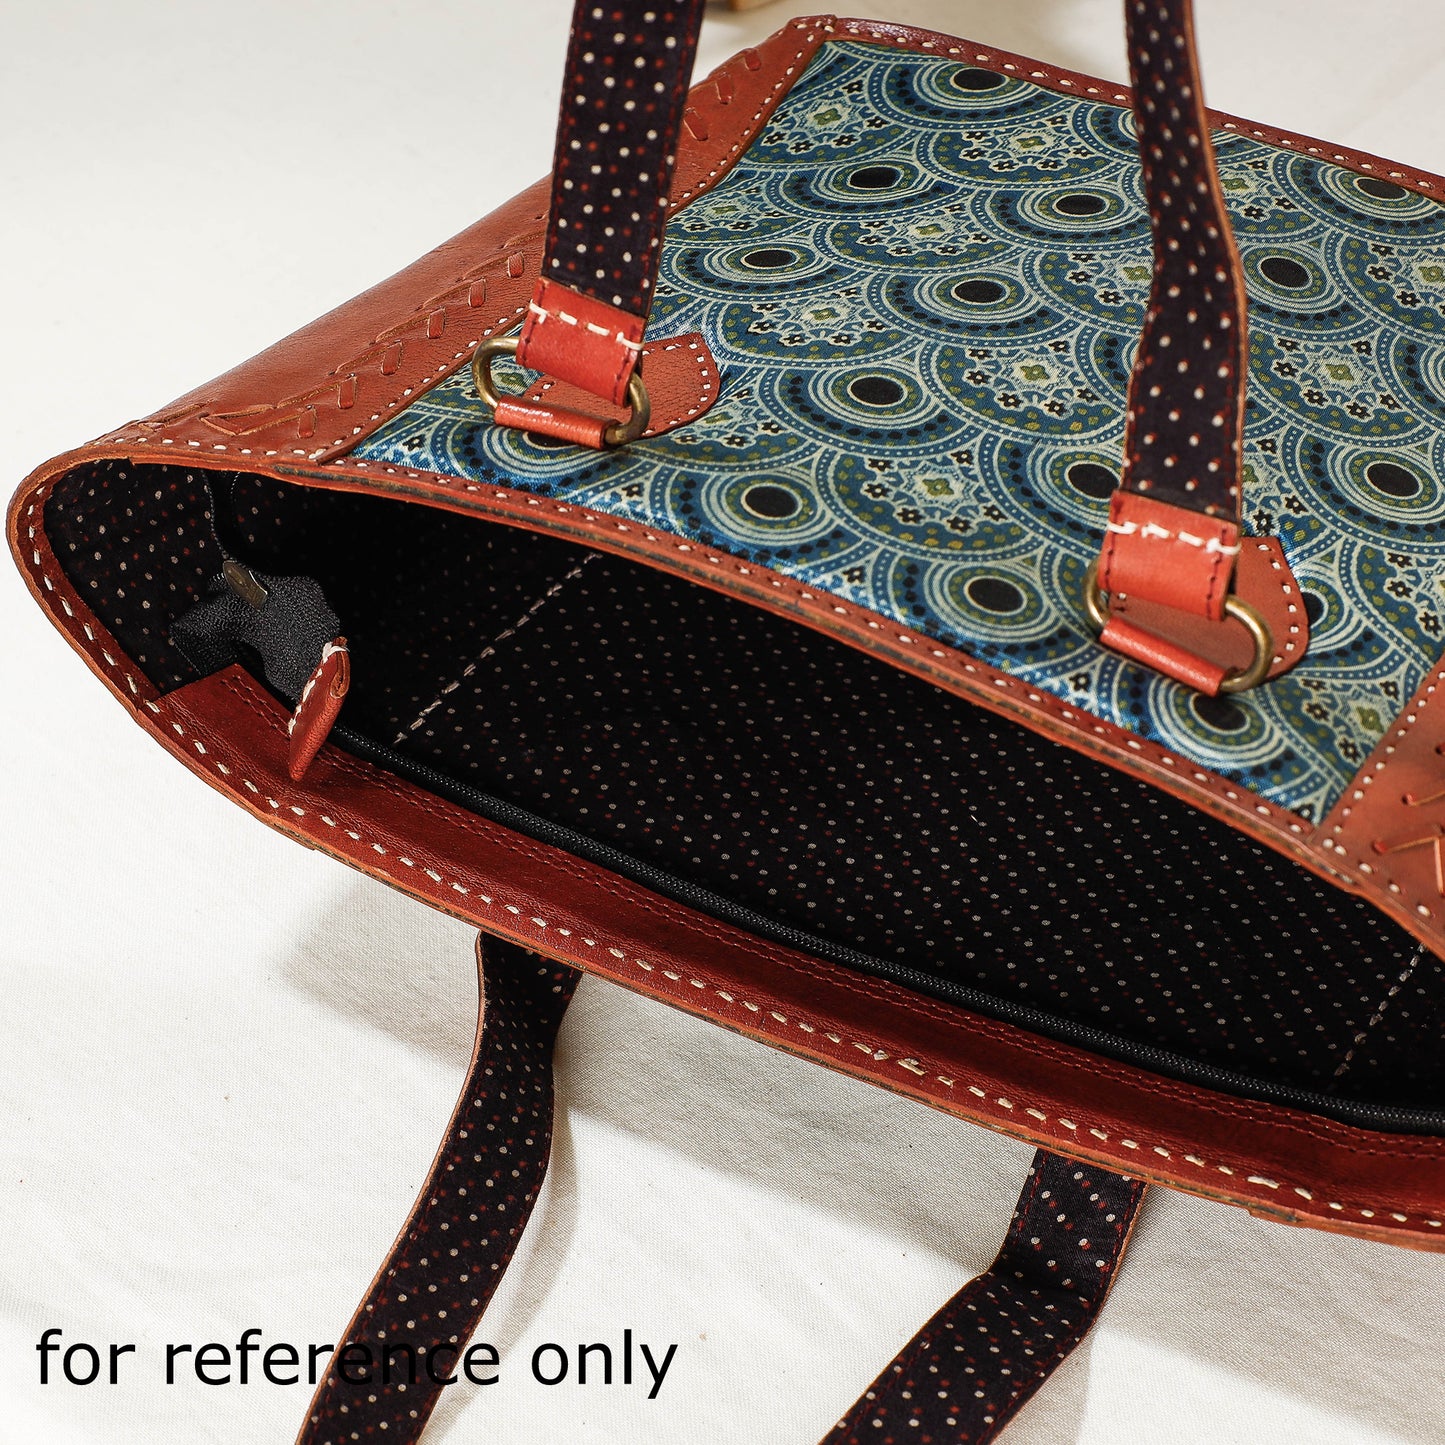 Red - Handcrafted Kutch Jat  Embroidery Leather Shoulder Bag